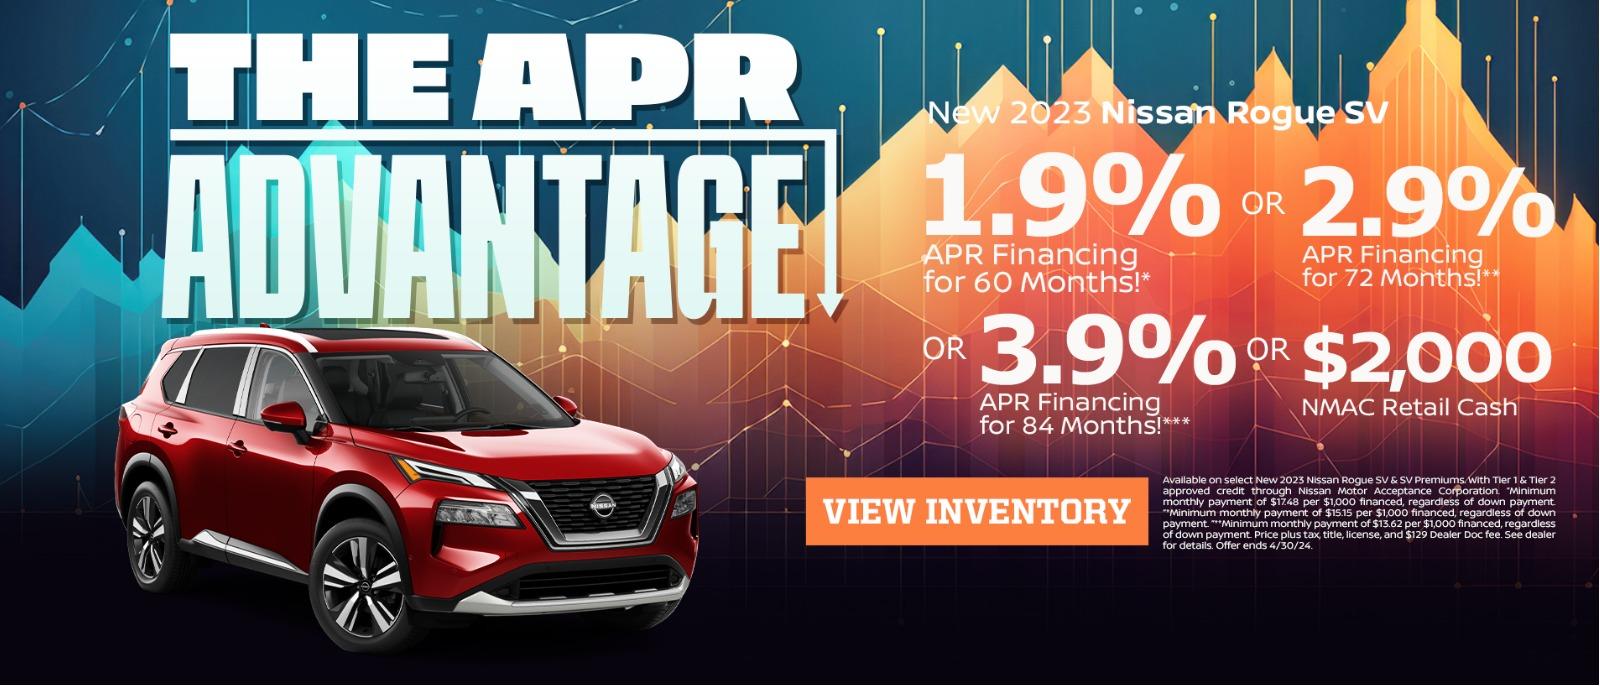 New 2023 Nissan Rogue SV
1.9% APR Financing for 60 Months
Or
2.9% APR Financing for 72 Months
Or
2.9% APR Financing for 84 Months!***
Or
$2,000 NMAC Retail Cash